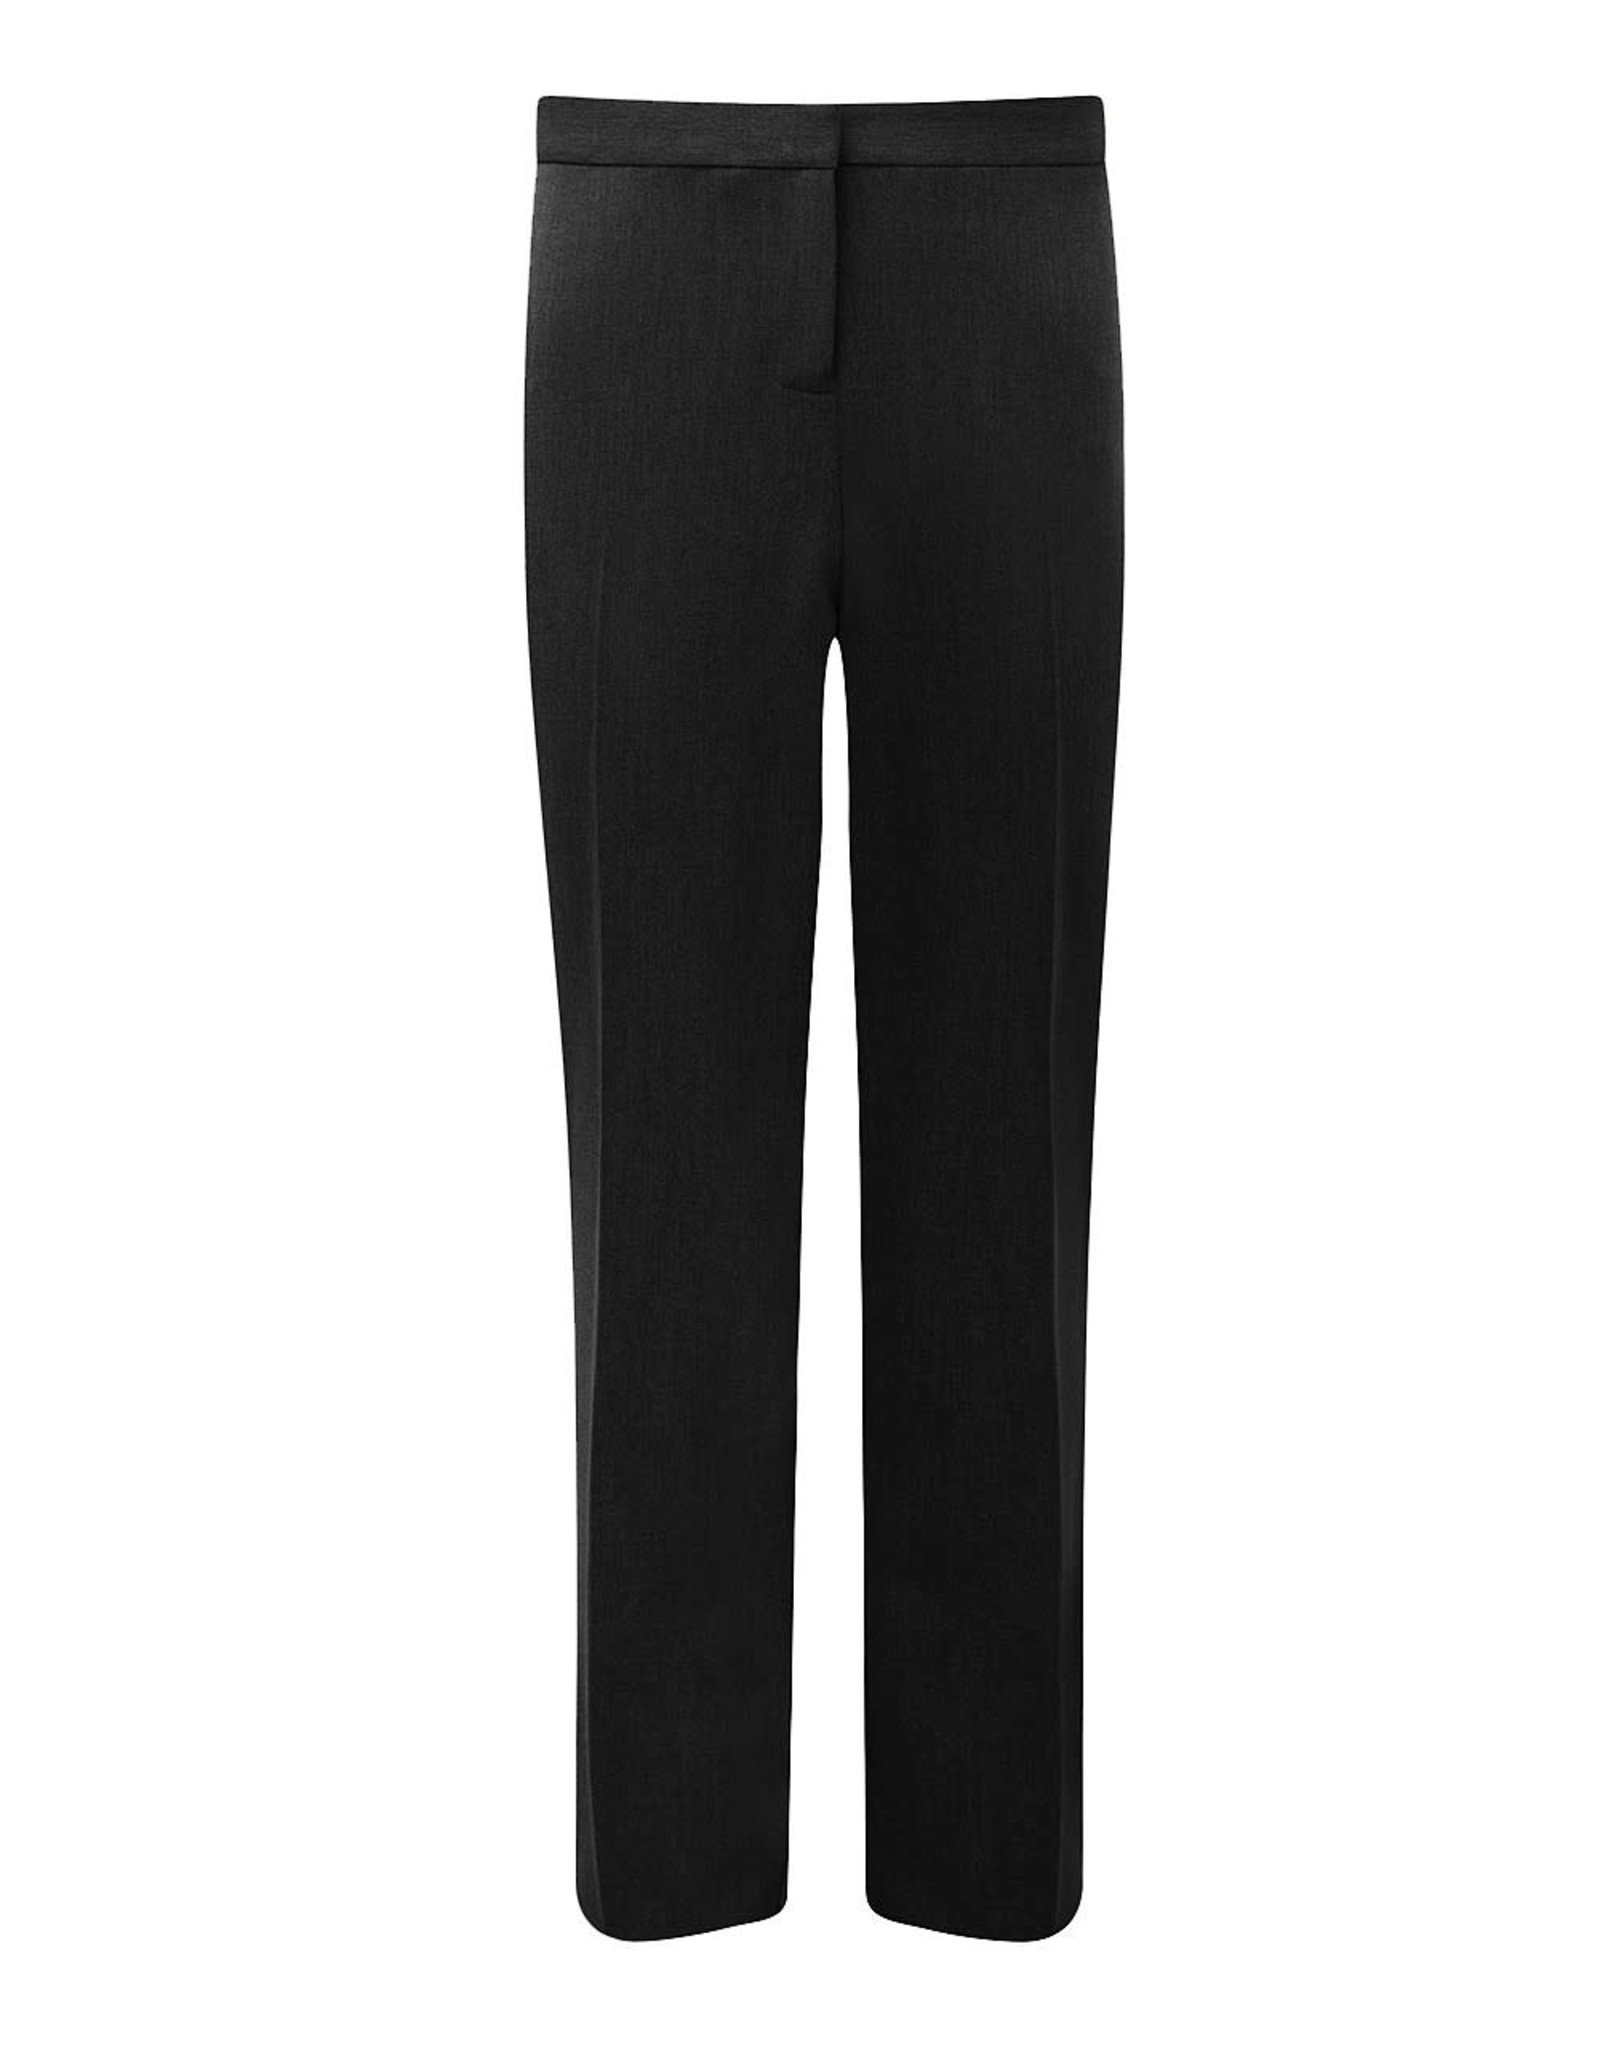 TRIMLEY Girls Trimley Trousers Adult Size